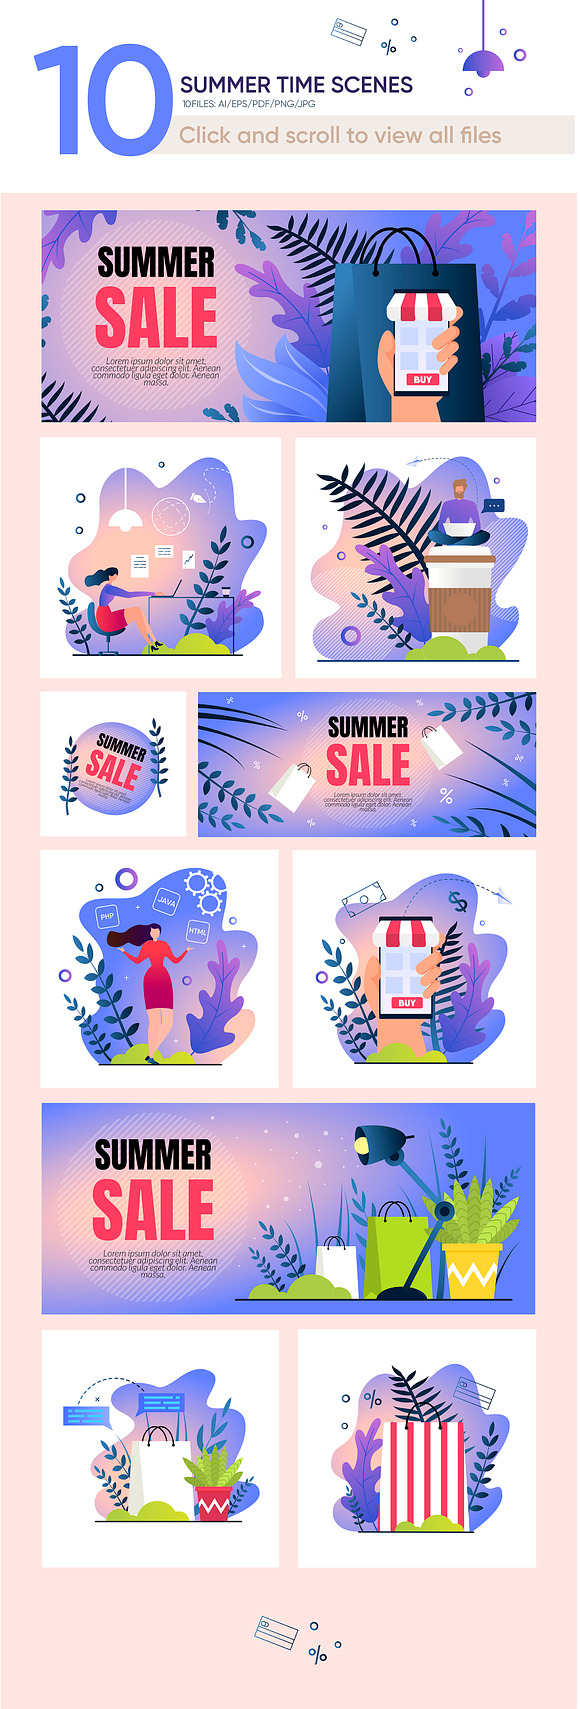 Business Summer Time Scenes in Illustrations - product preview 1